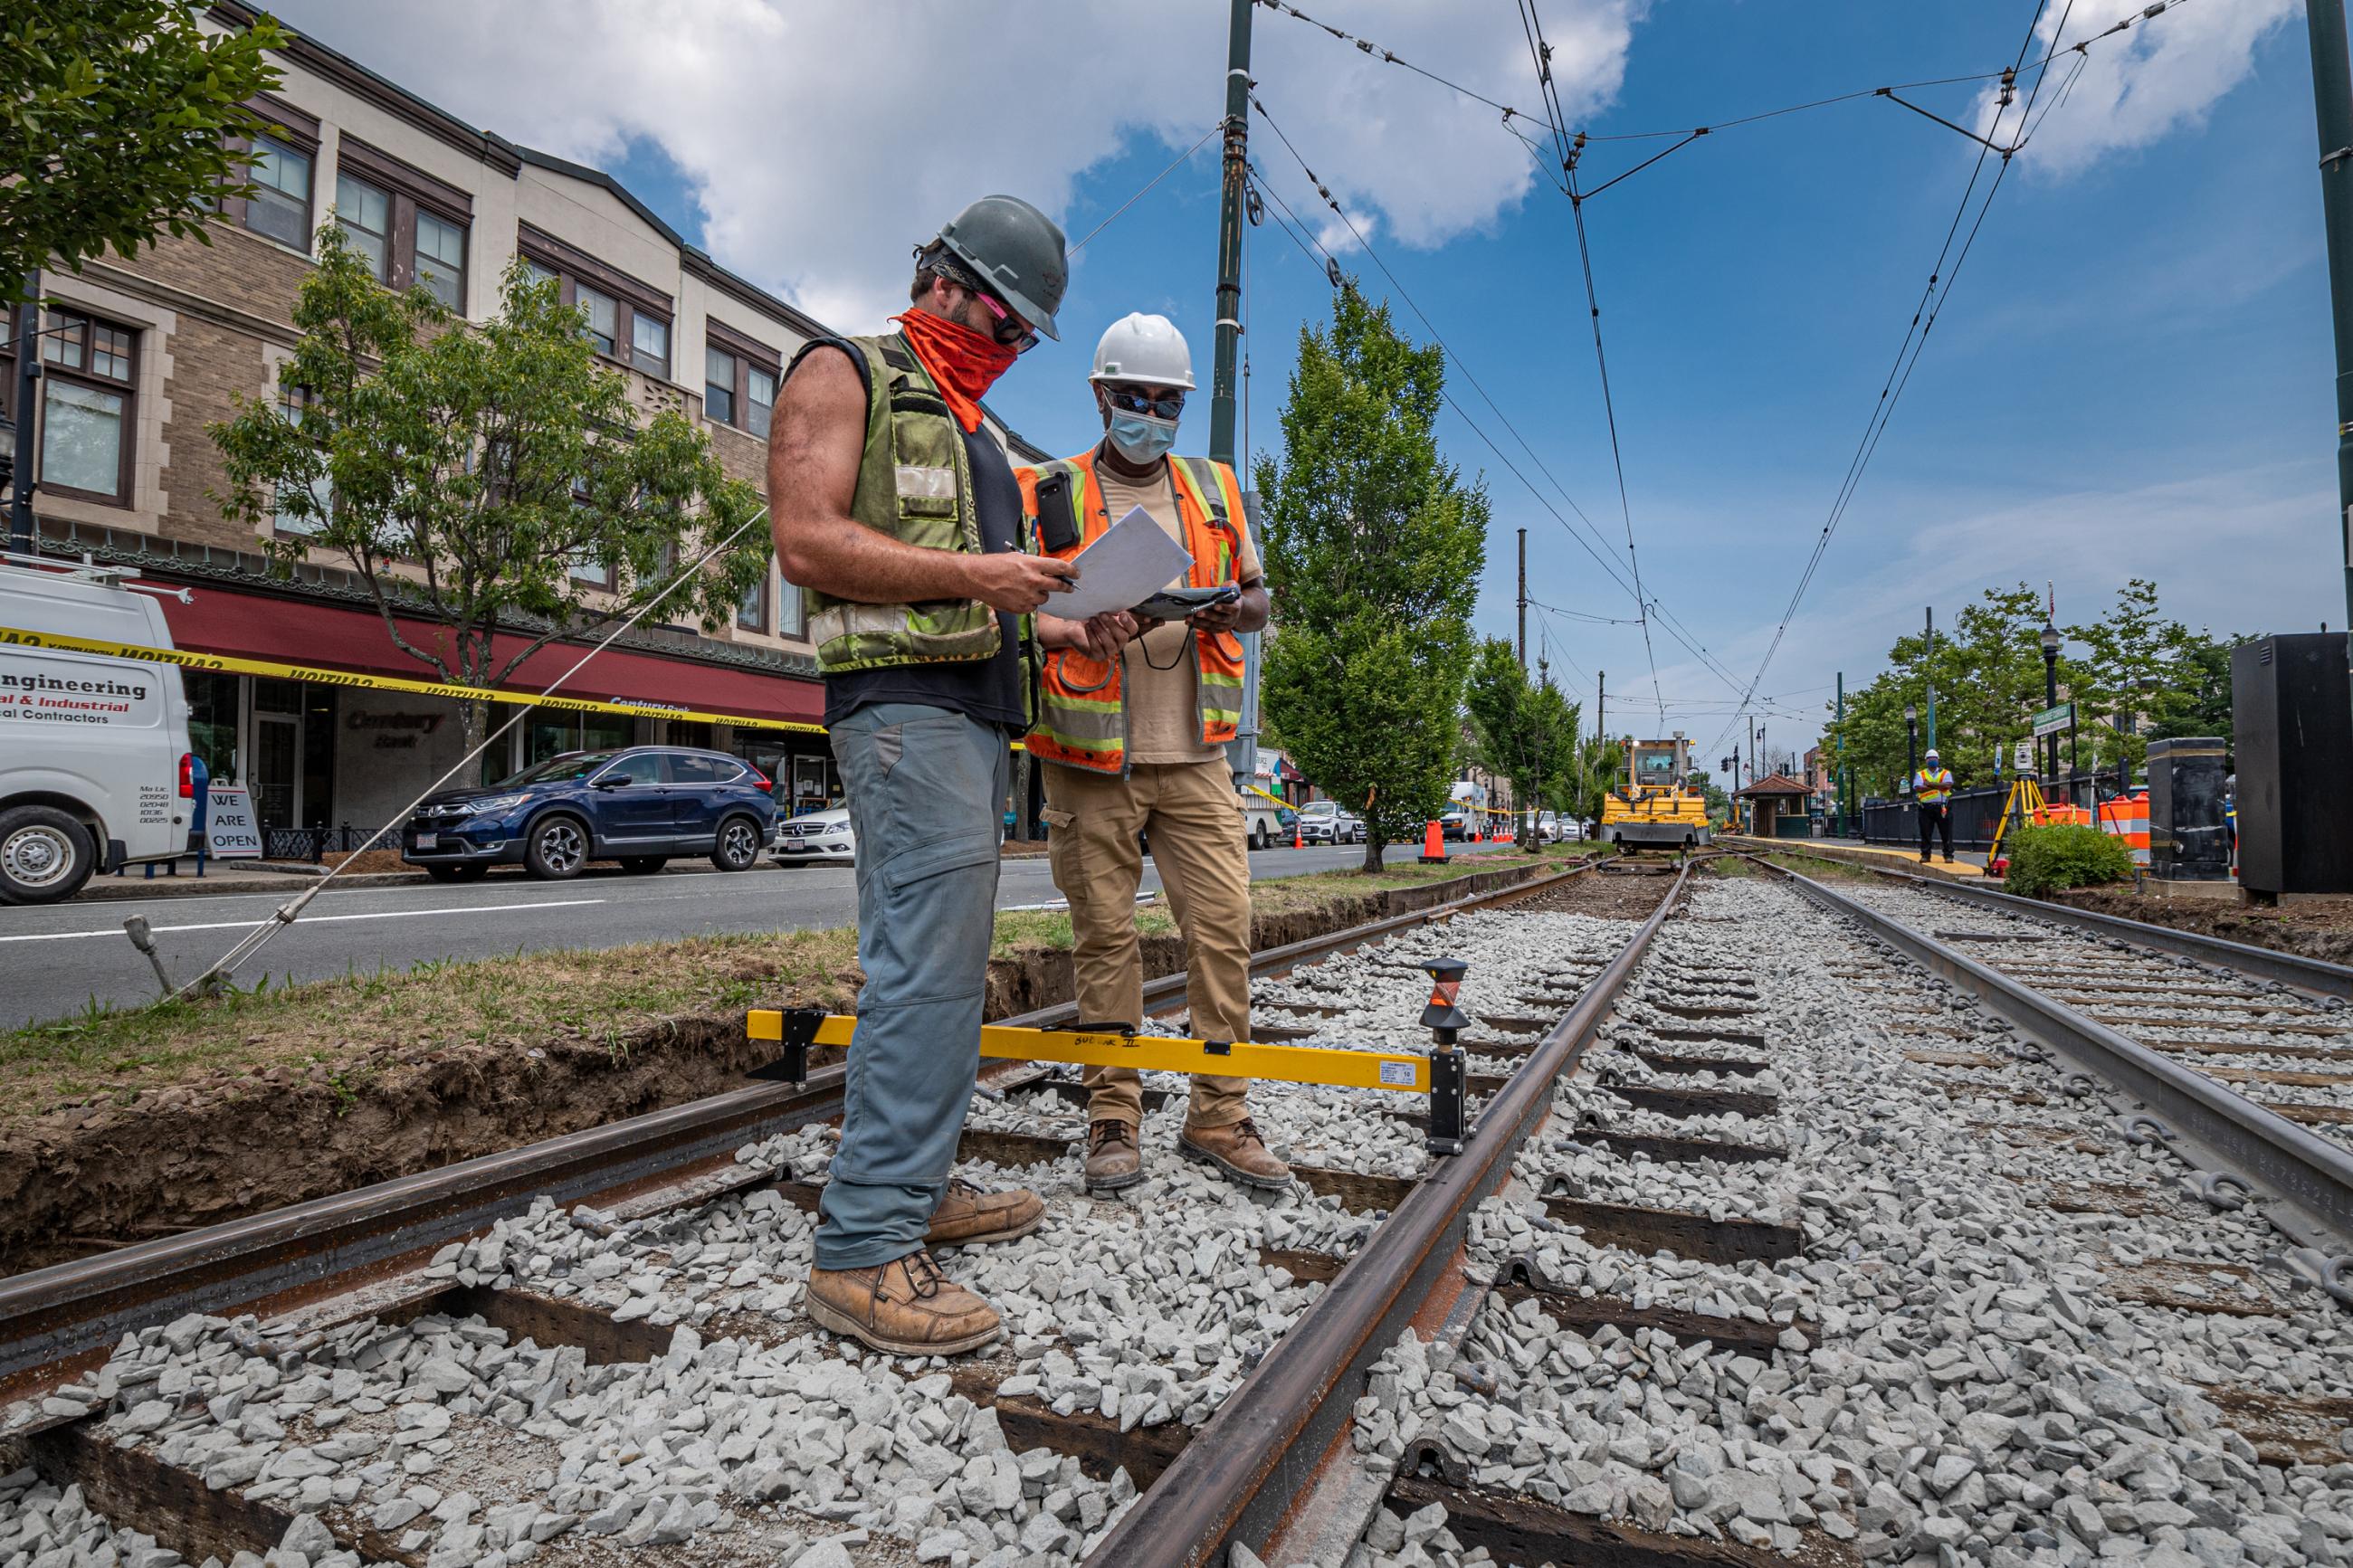 Crew members preparing for track work on the Green Line C Branch